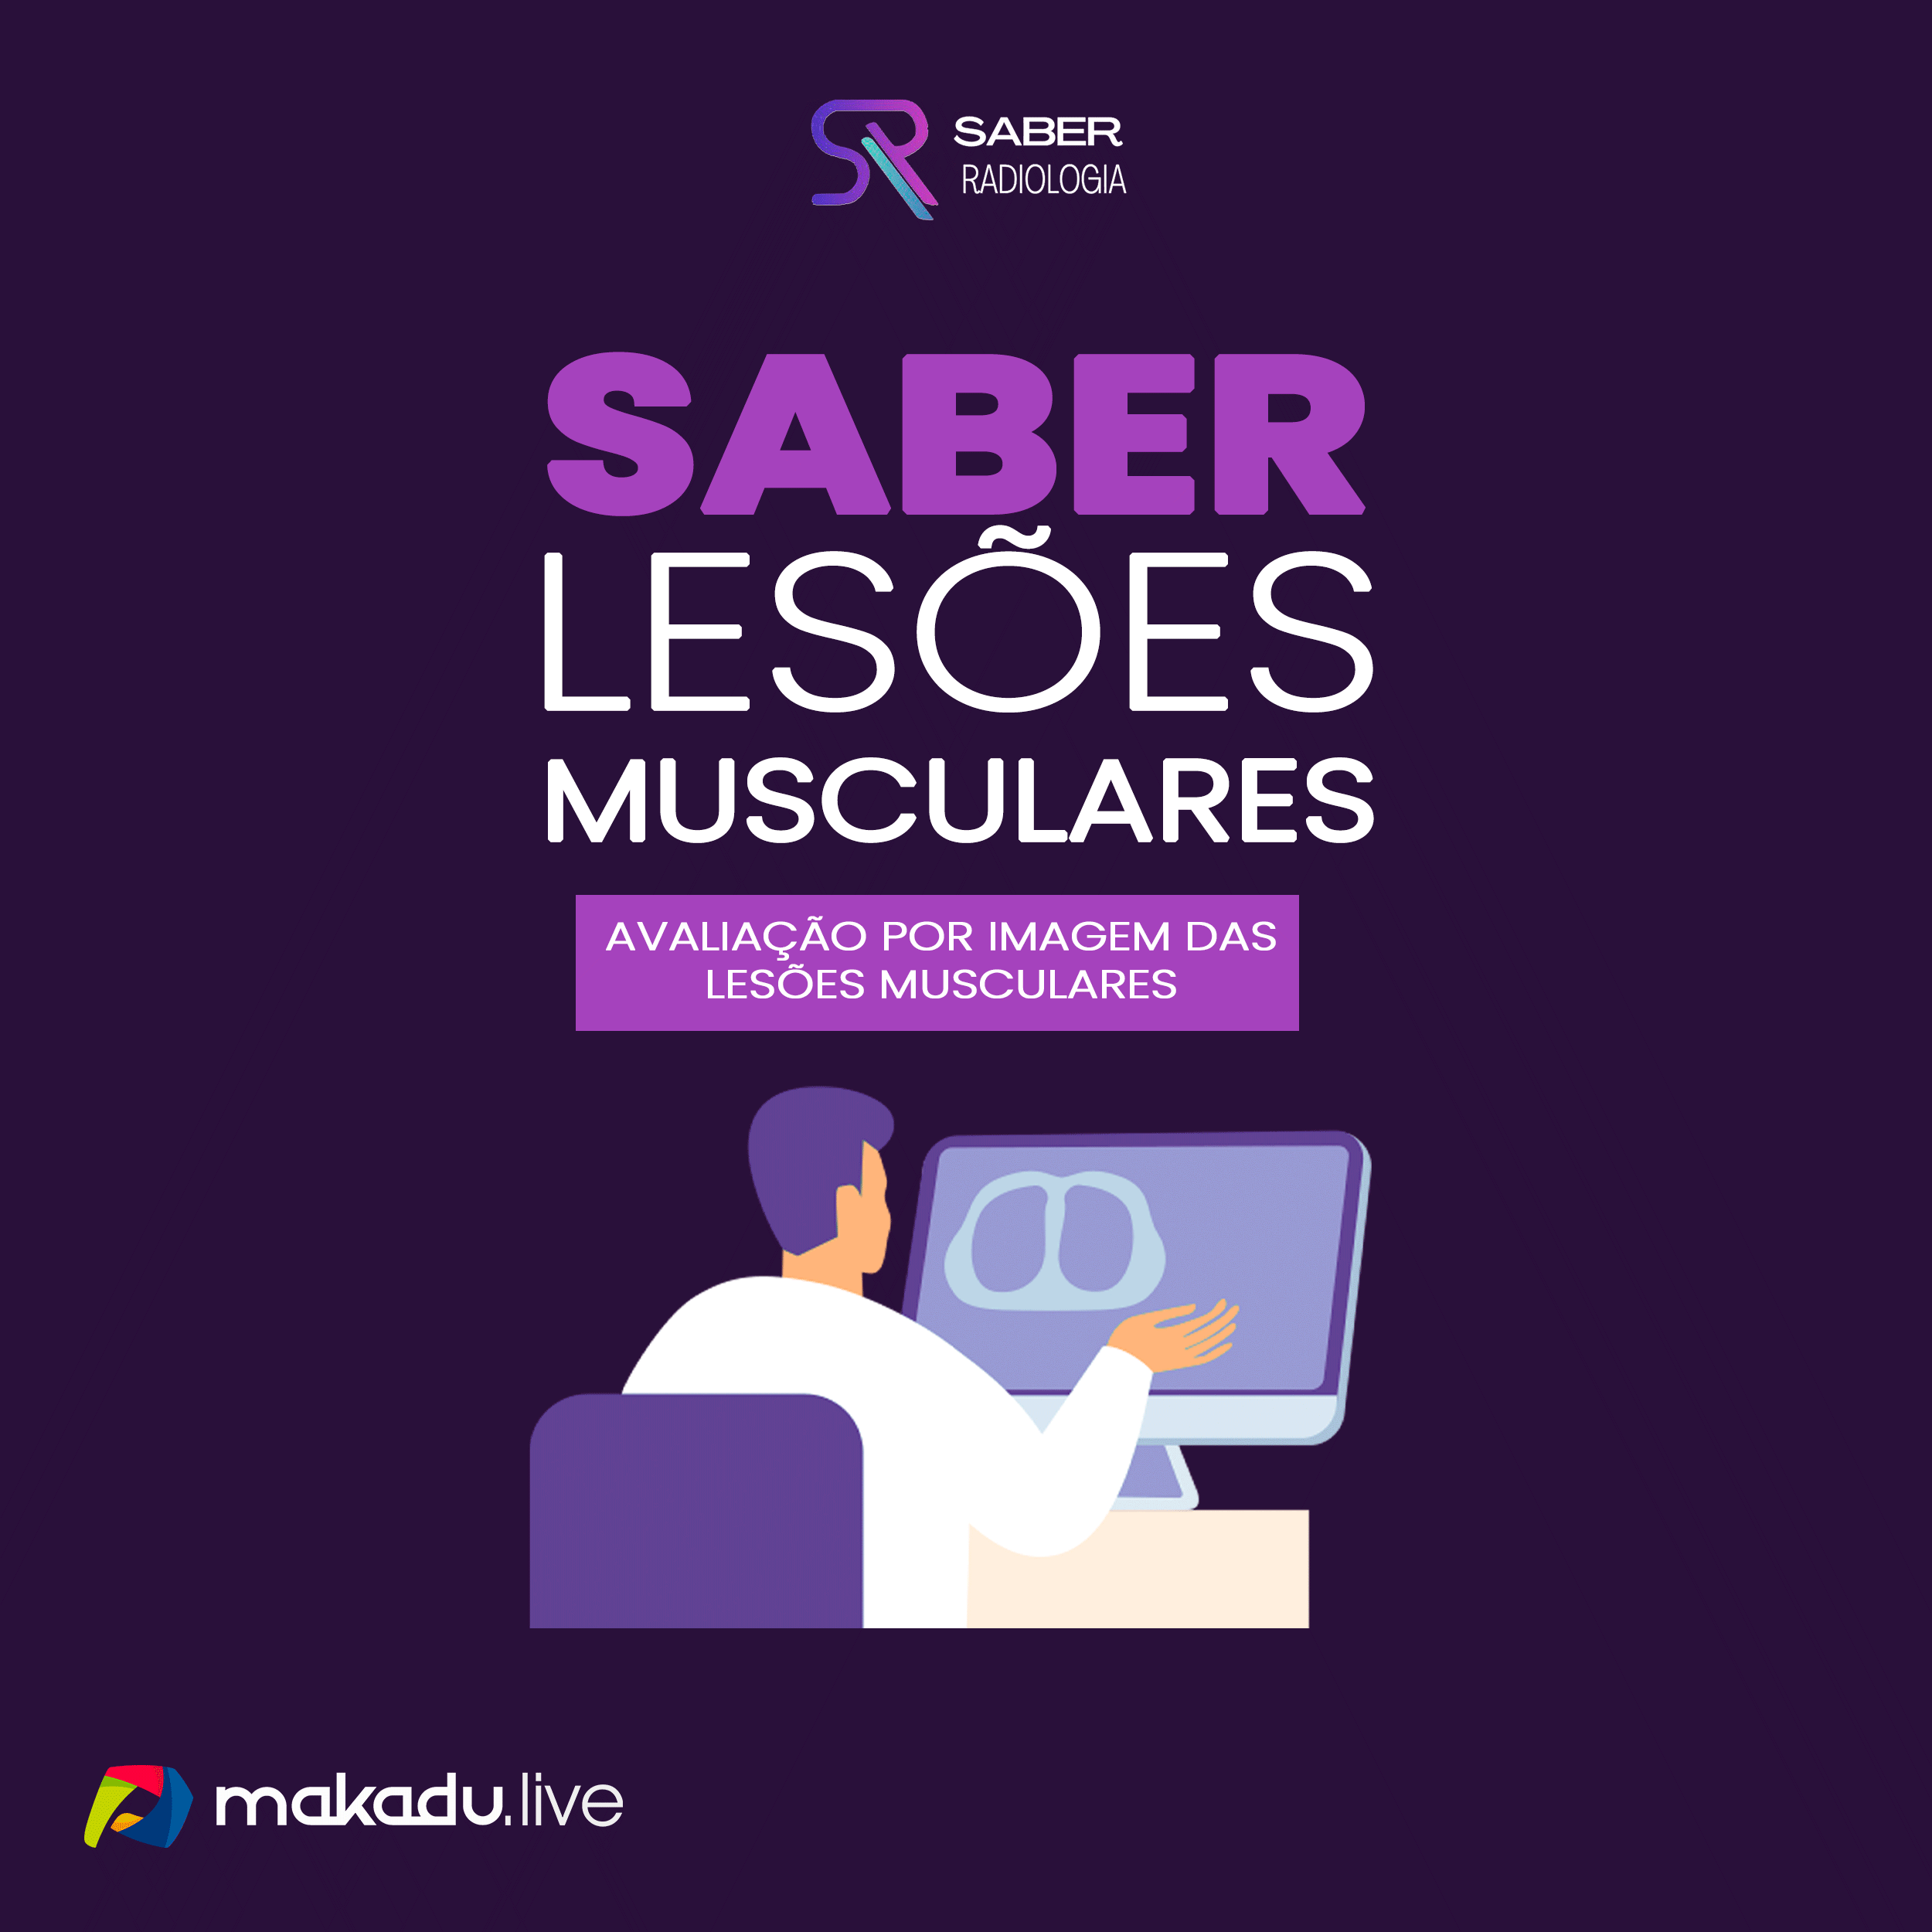 saber radiologia - lesoes - whats